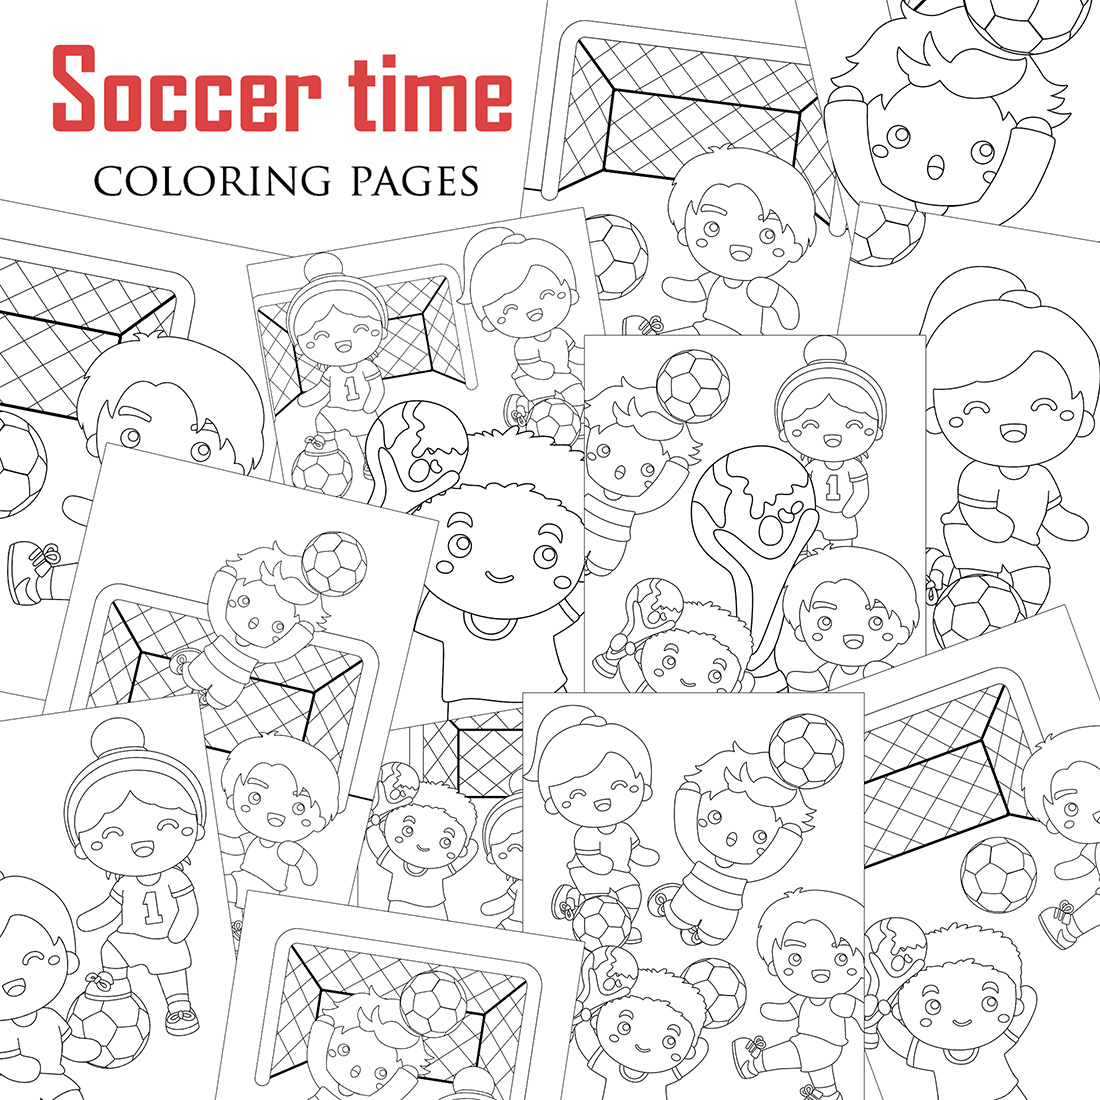 Happy Kids Playing Soccer Time Football Outdoor Activity Tournament School Club Coloring Pages for Kids and Adult cover image.